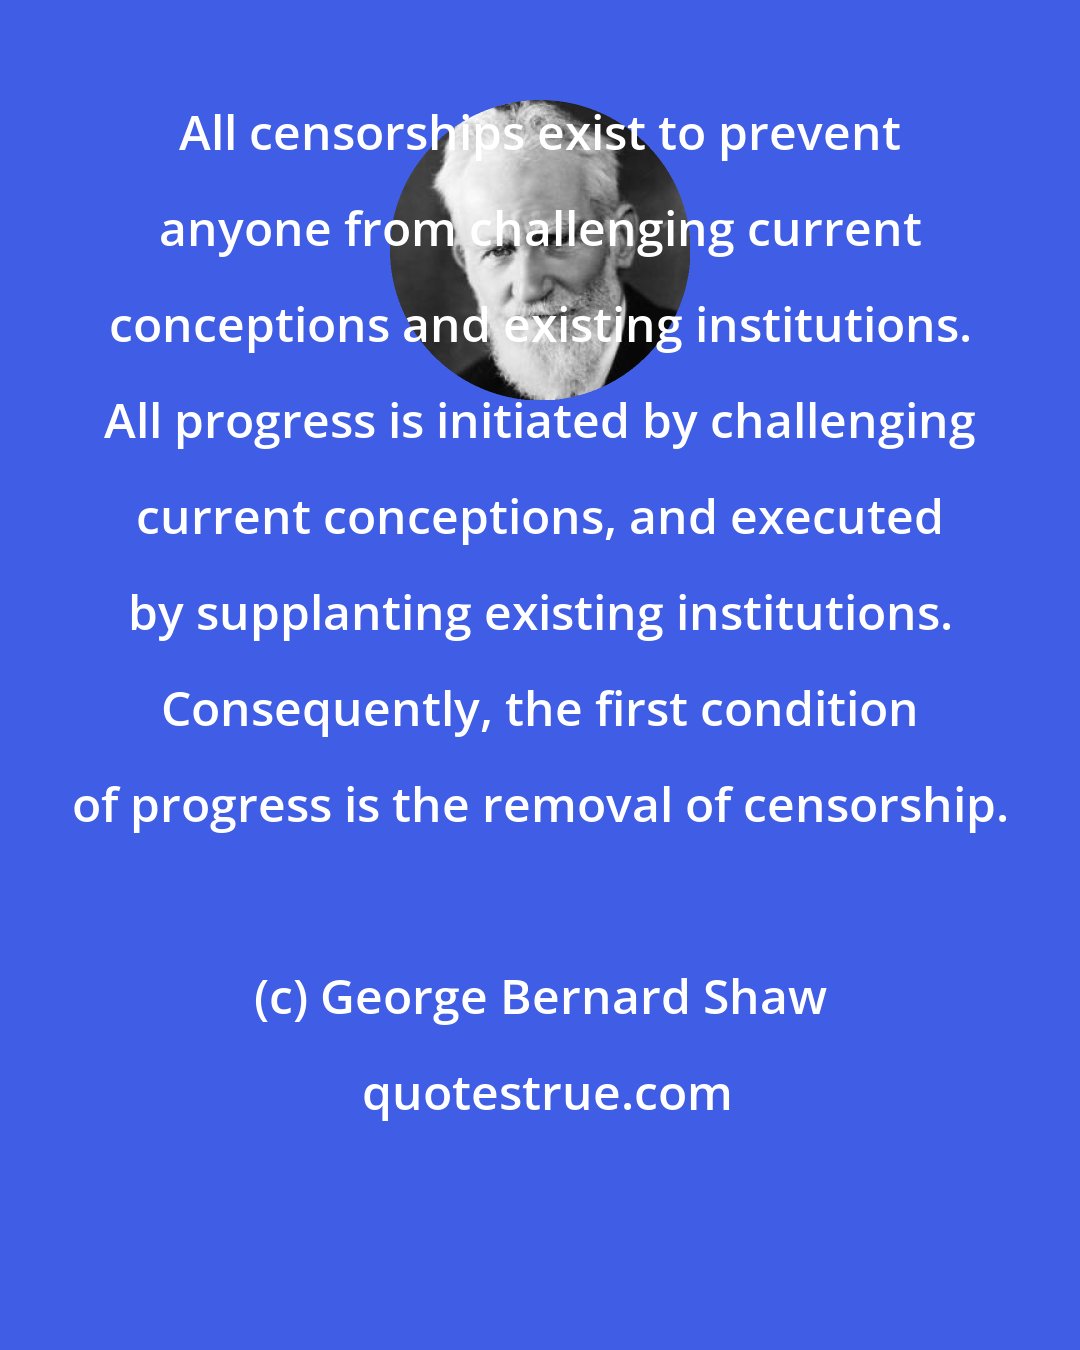 George Bernard Shaw: All censorships exist to prevent anyone from challenging current conceptions and existing institutions. All progress is initiated by challenging current conceptions, and executed by supplanting existing institutions. Consequently, the first condition of progress is the removal of censorship.